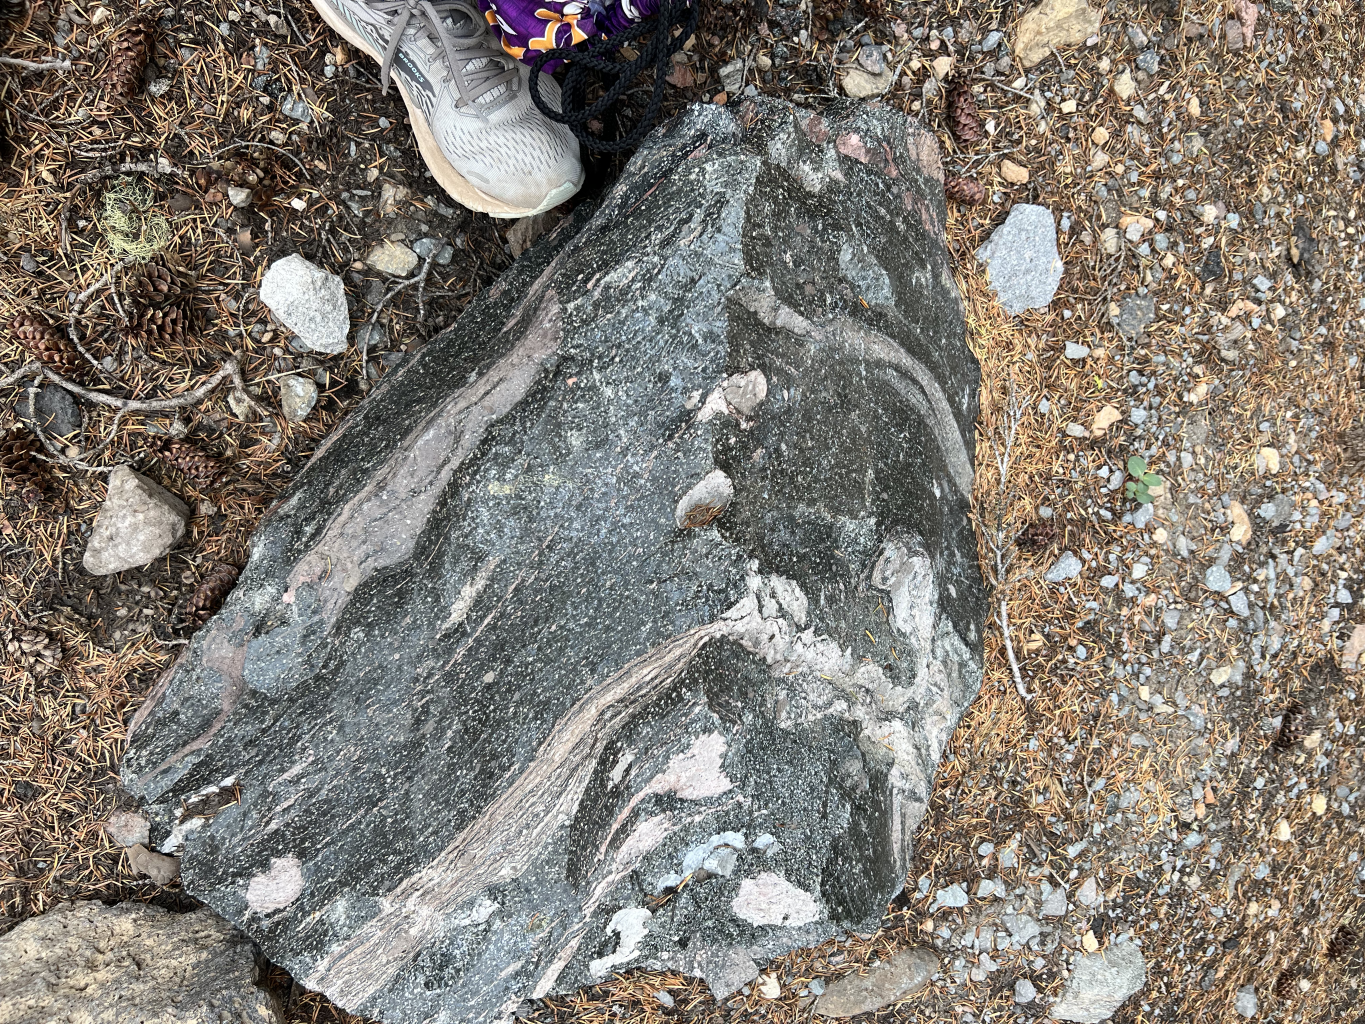  A close up of a beautiful obsidian boulder at Stop 8. This was produced by the Llao Rock eruption. 